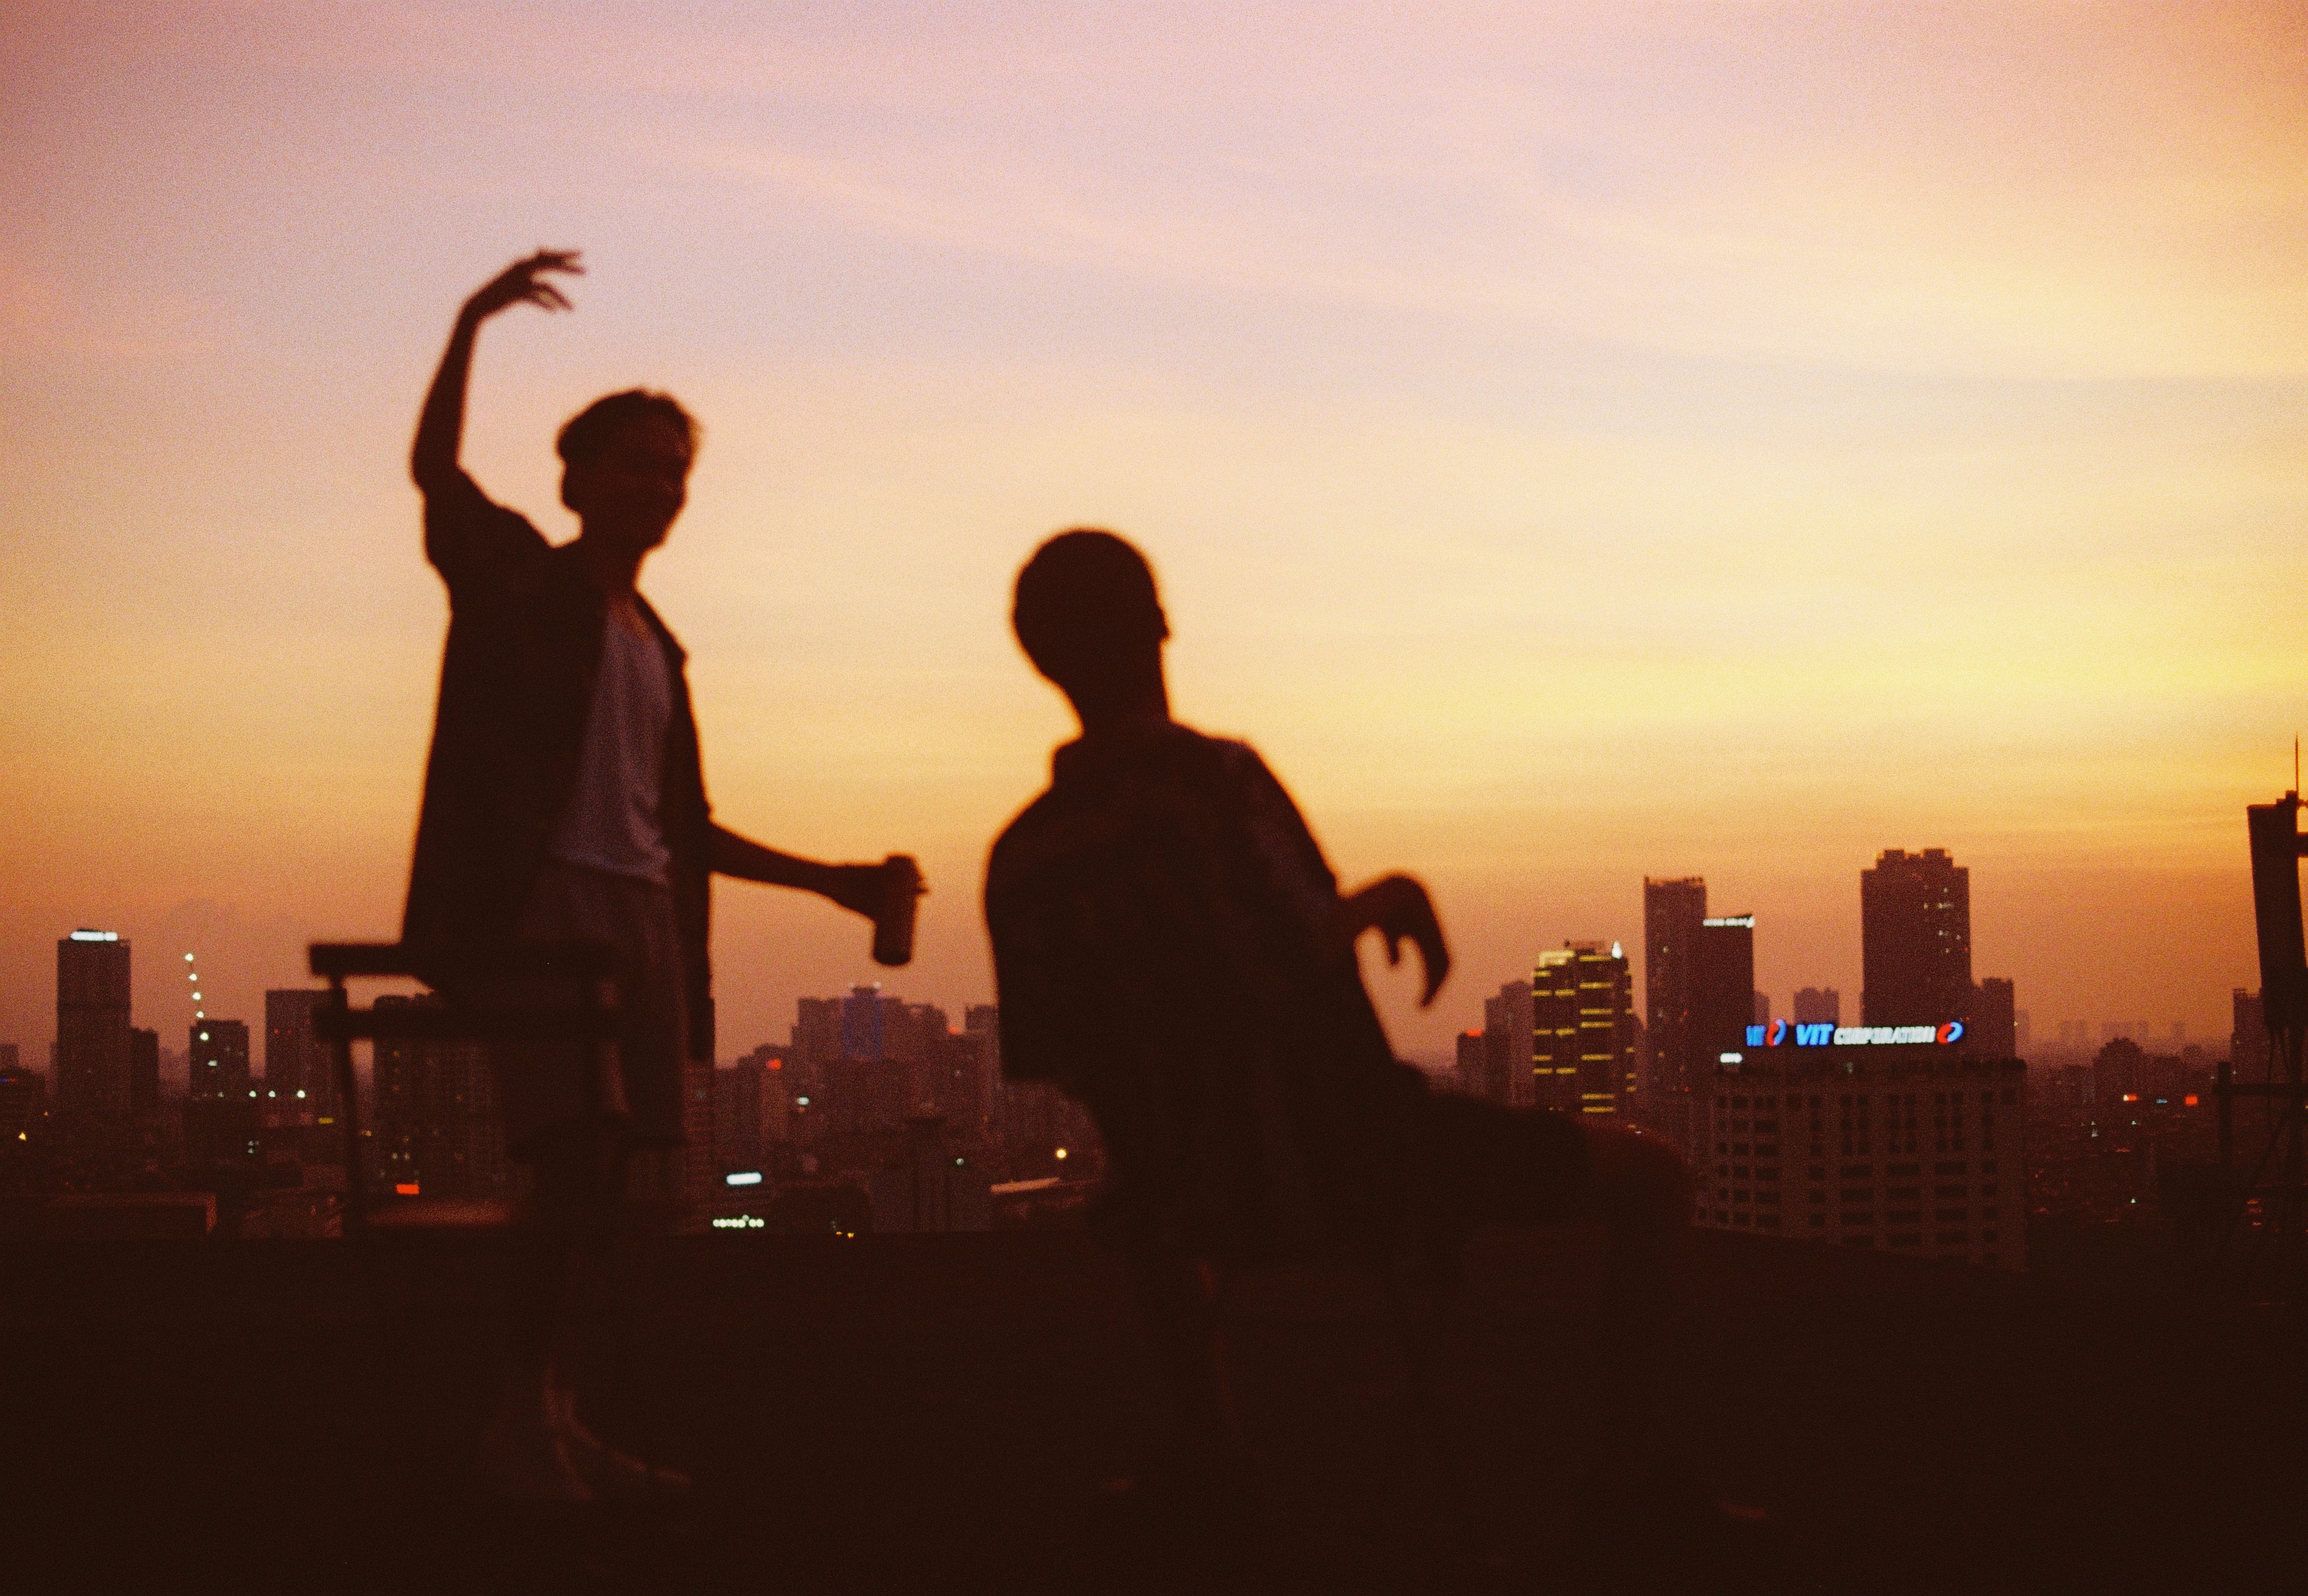 Two boys with cans of drinks dance around on a rooftop against the city skyline at sunset. 